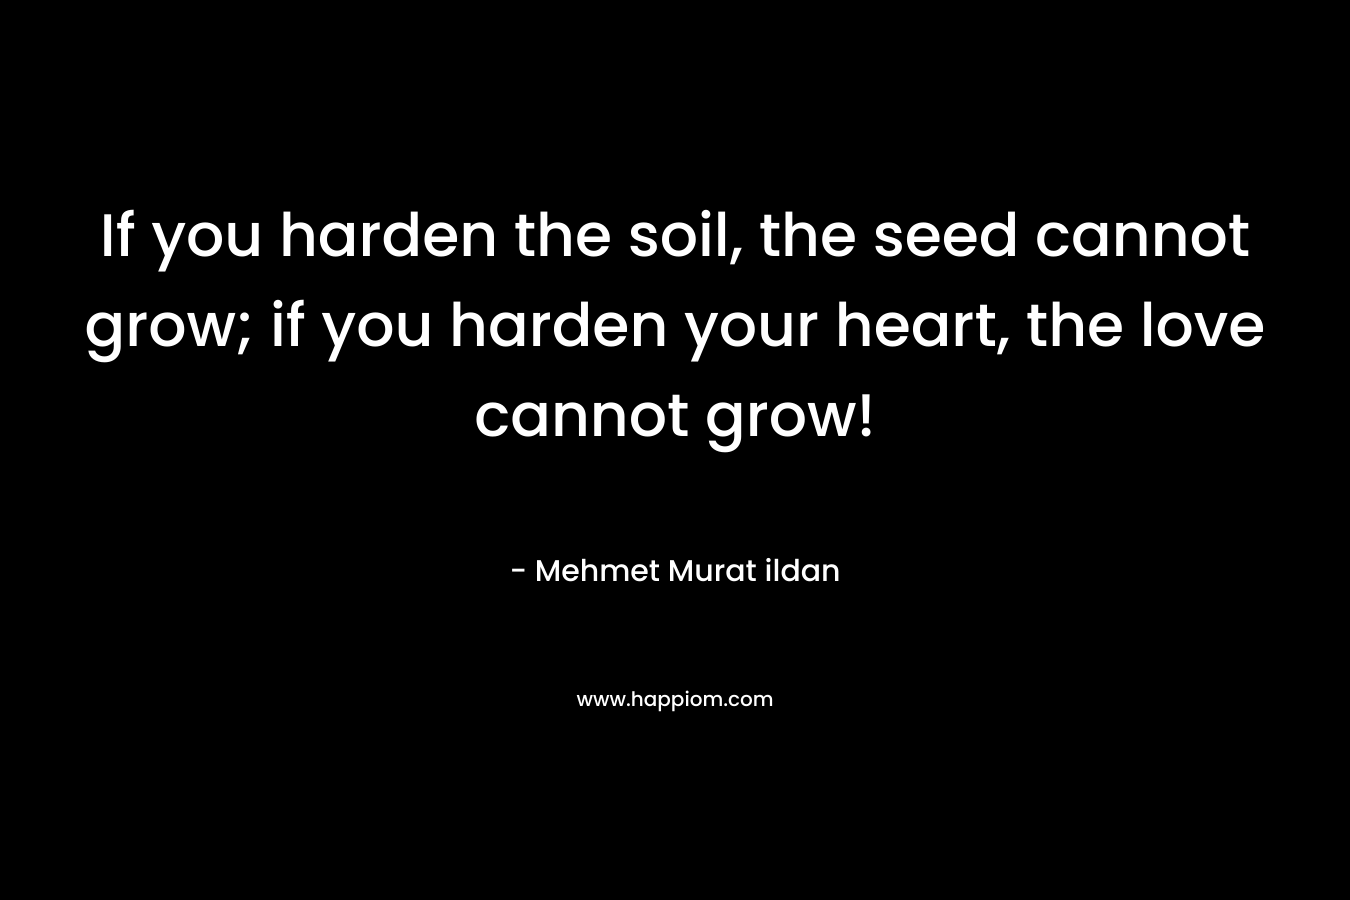 If you harden the soil, the seed cannot grow; if you harden your heart, the love cannot grow!